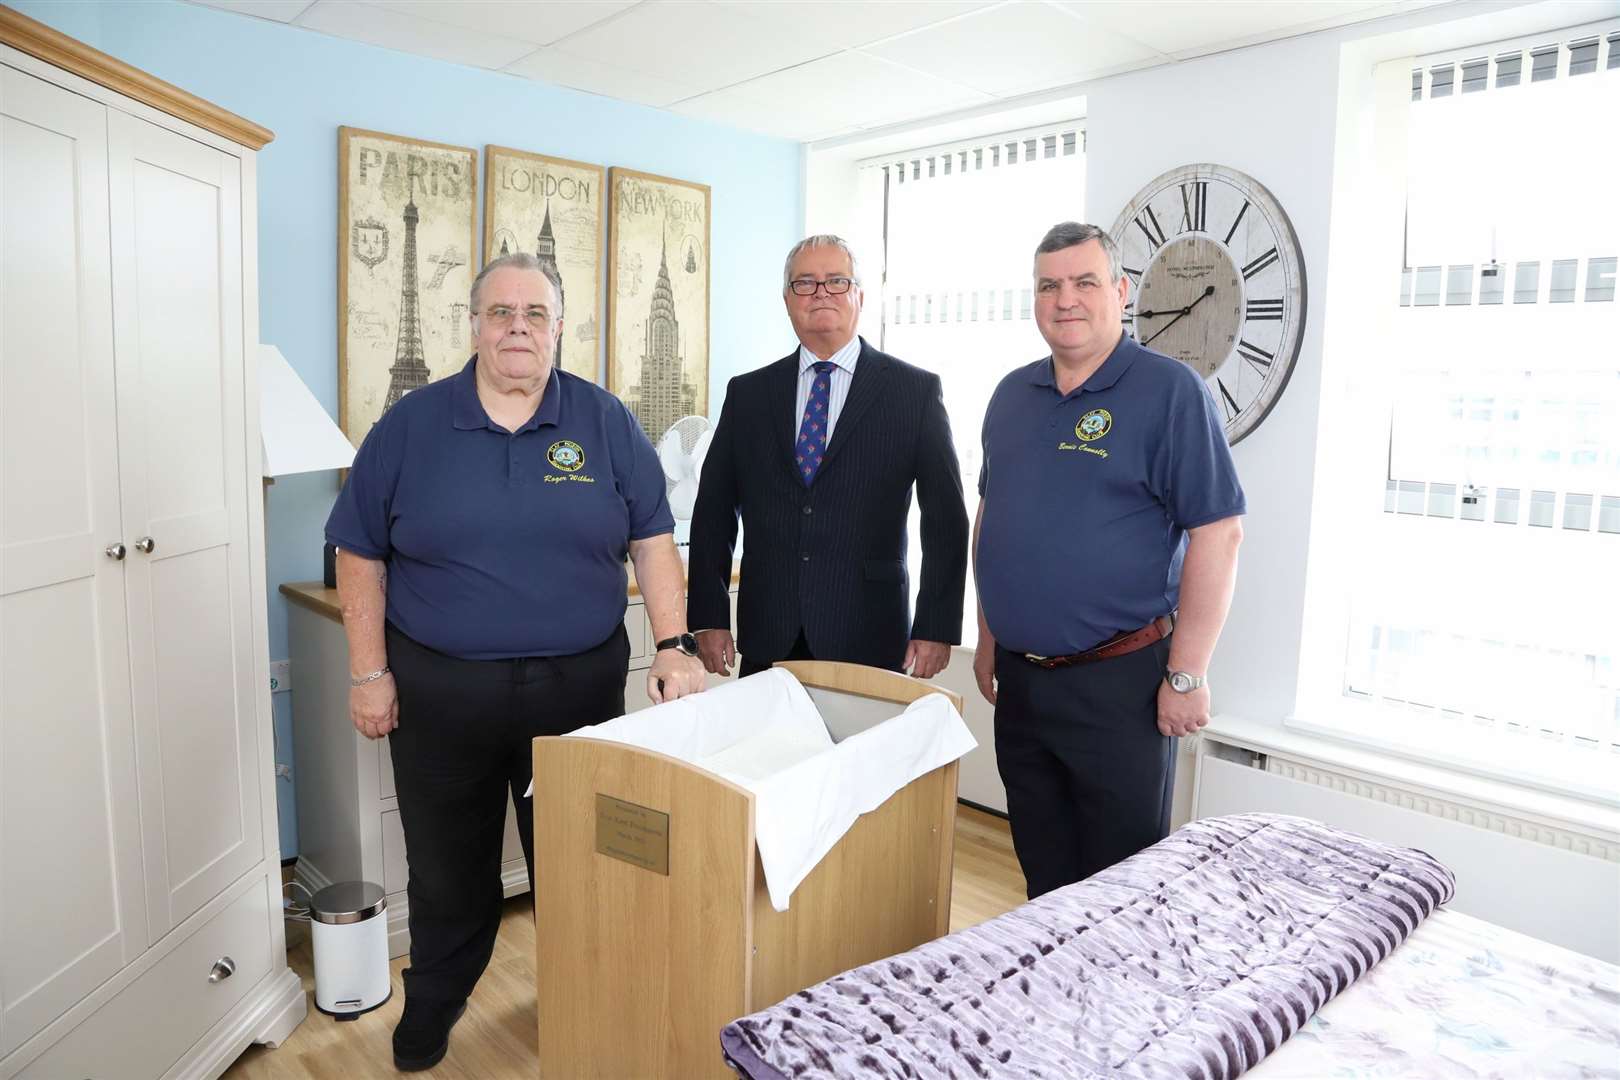 The cot helps to keep the baby at a cool temperature meaning the child can stay with their parents for longer. From left: Roger Wilkes, Richard Wingett, Assistant Provincial Grand Master and Bernie Connolly, Chairman, East Kent Masonic Clay Shooting Team